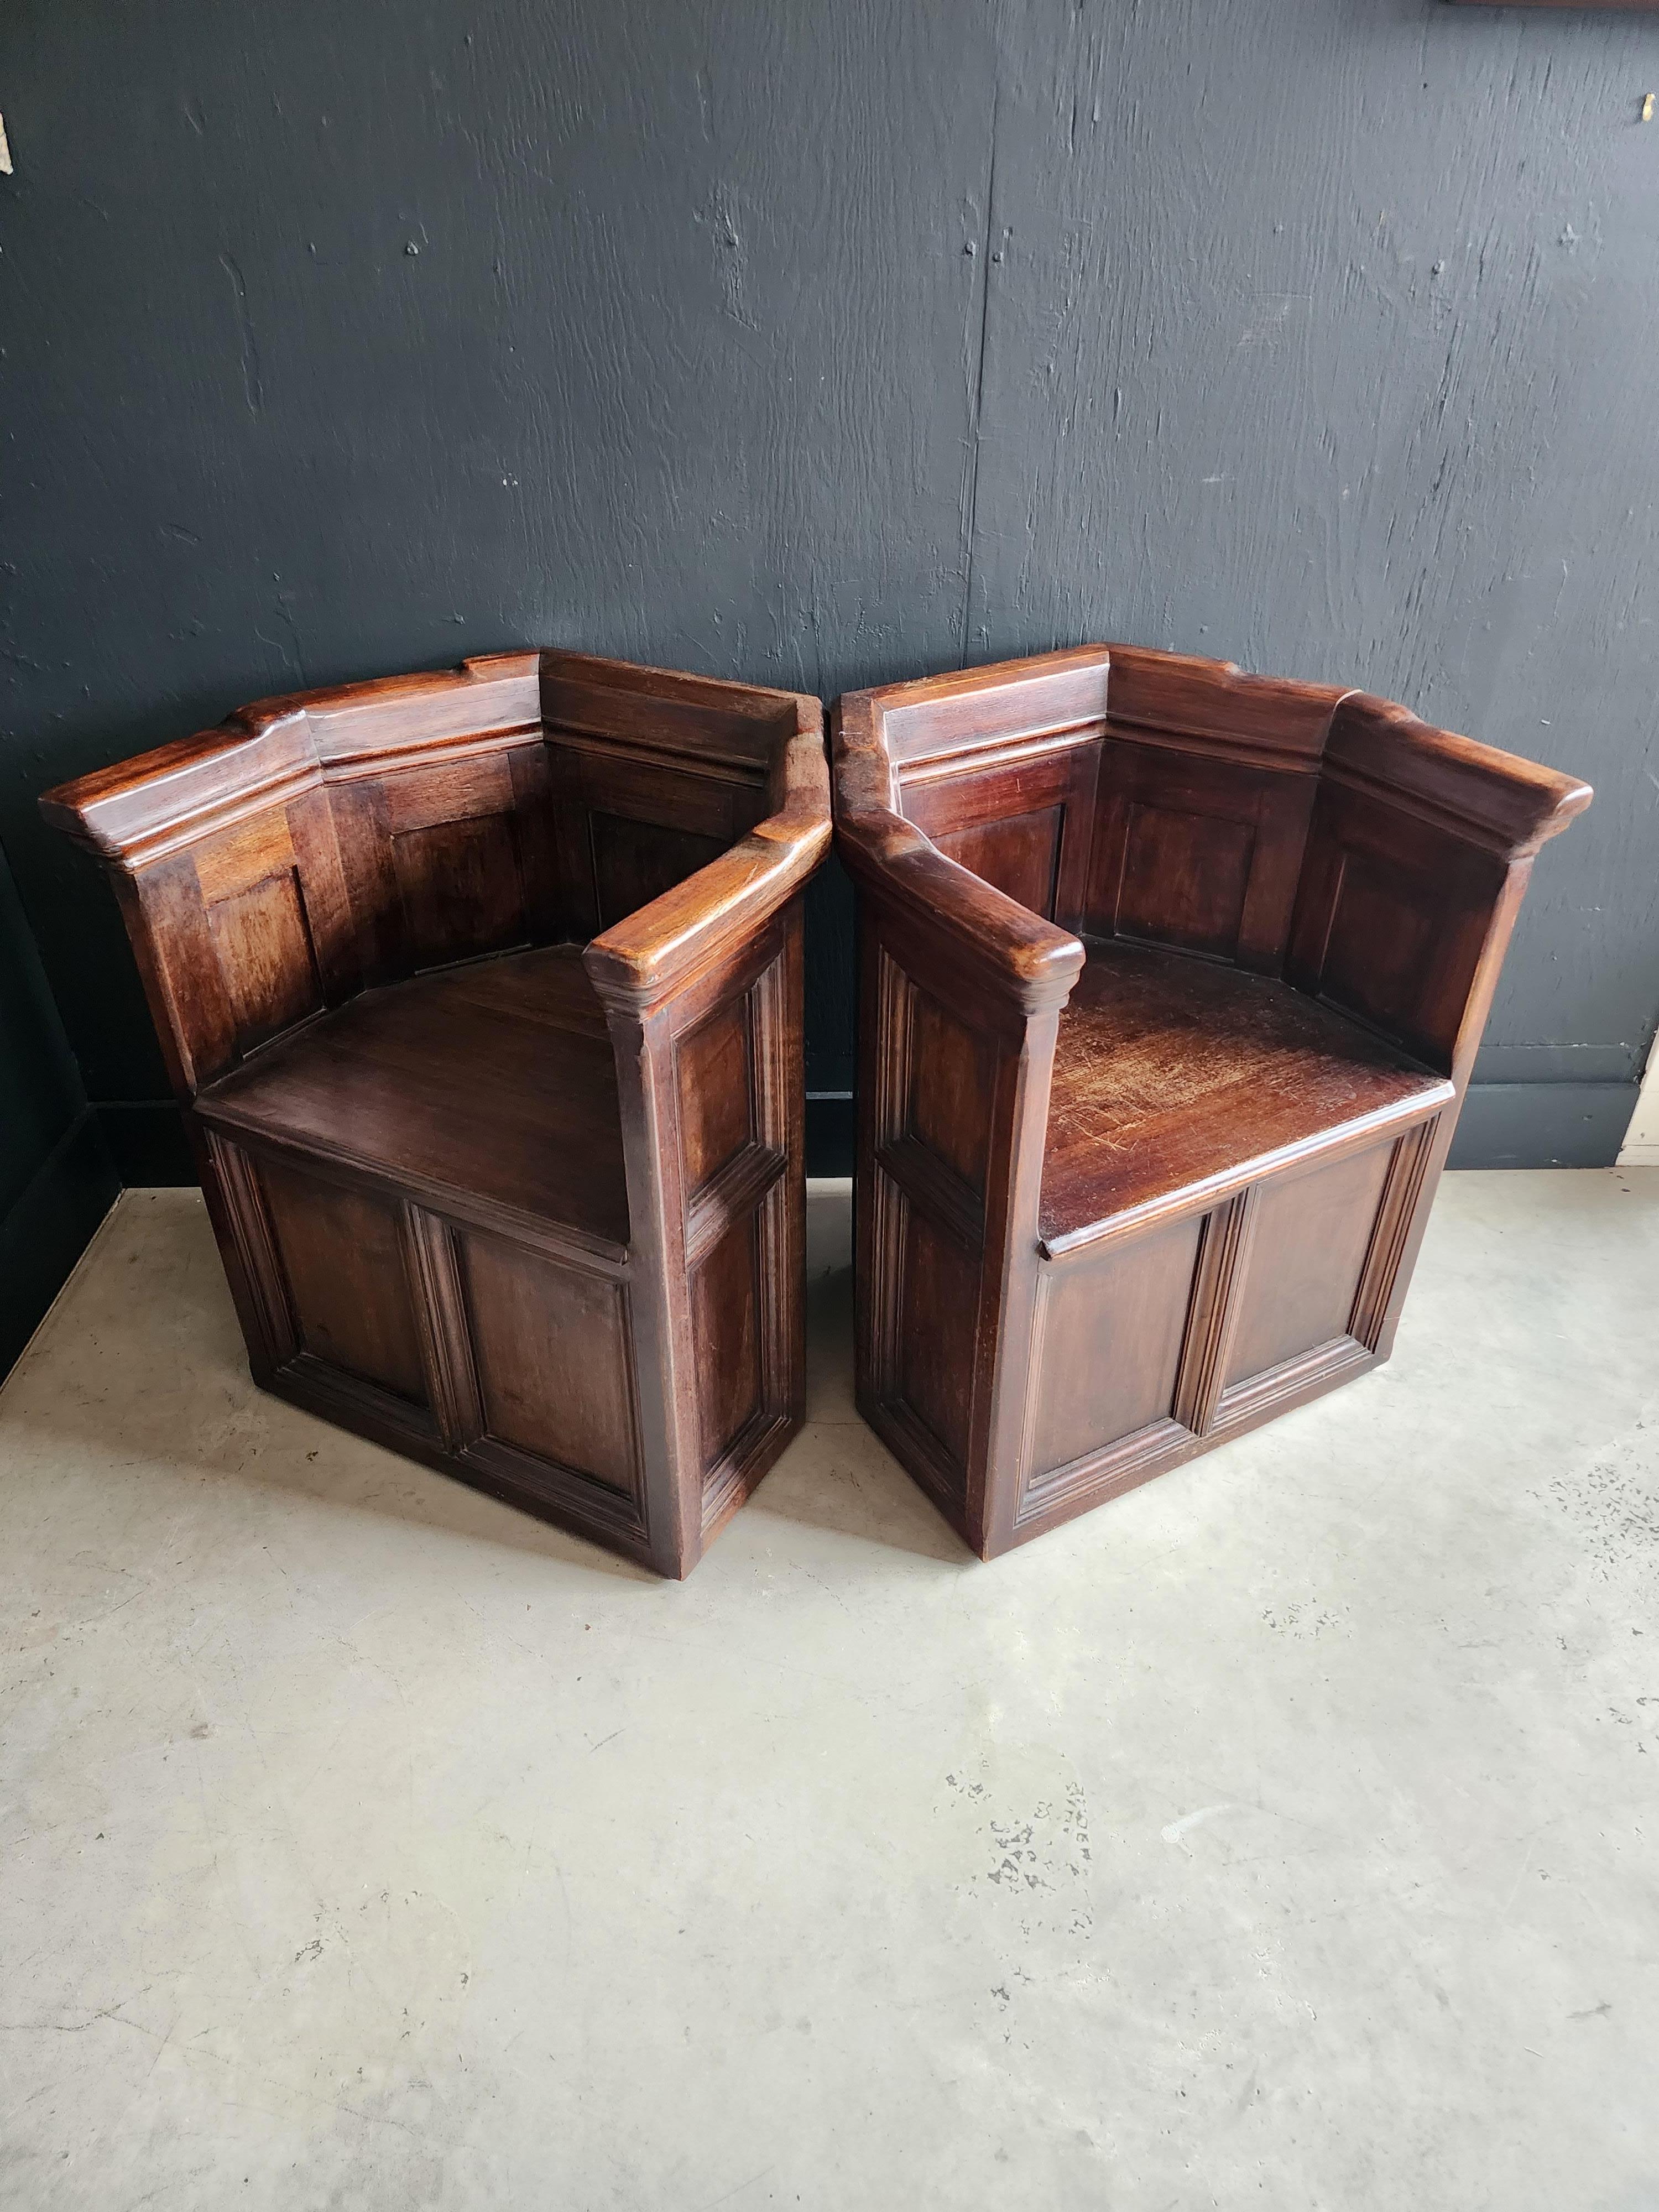 Pozzetto form, Florentine room chairs. 
Rare, hand-carved walnut Italian polygonal-shape chairs with 10 panel back segments. Original design from the 1400's. 
These are from Tuscany, circa 1820 and in excellent condition.
Please contact me with your